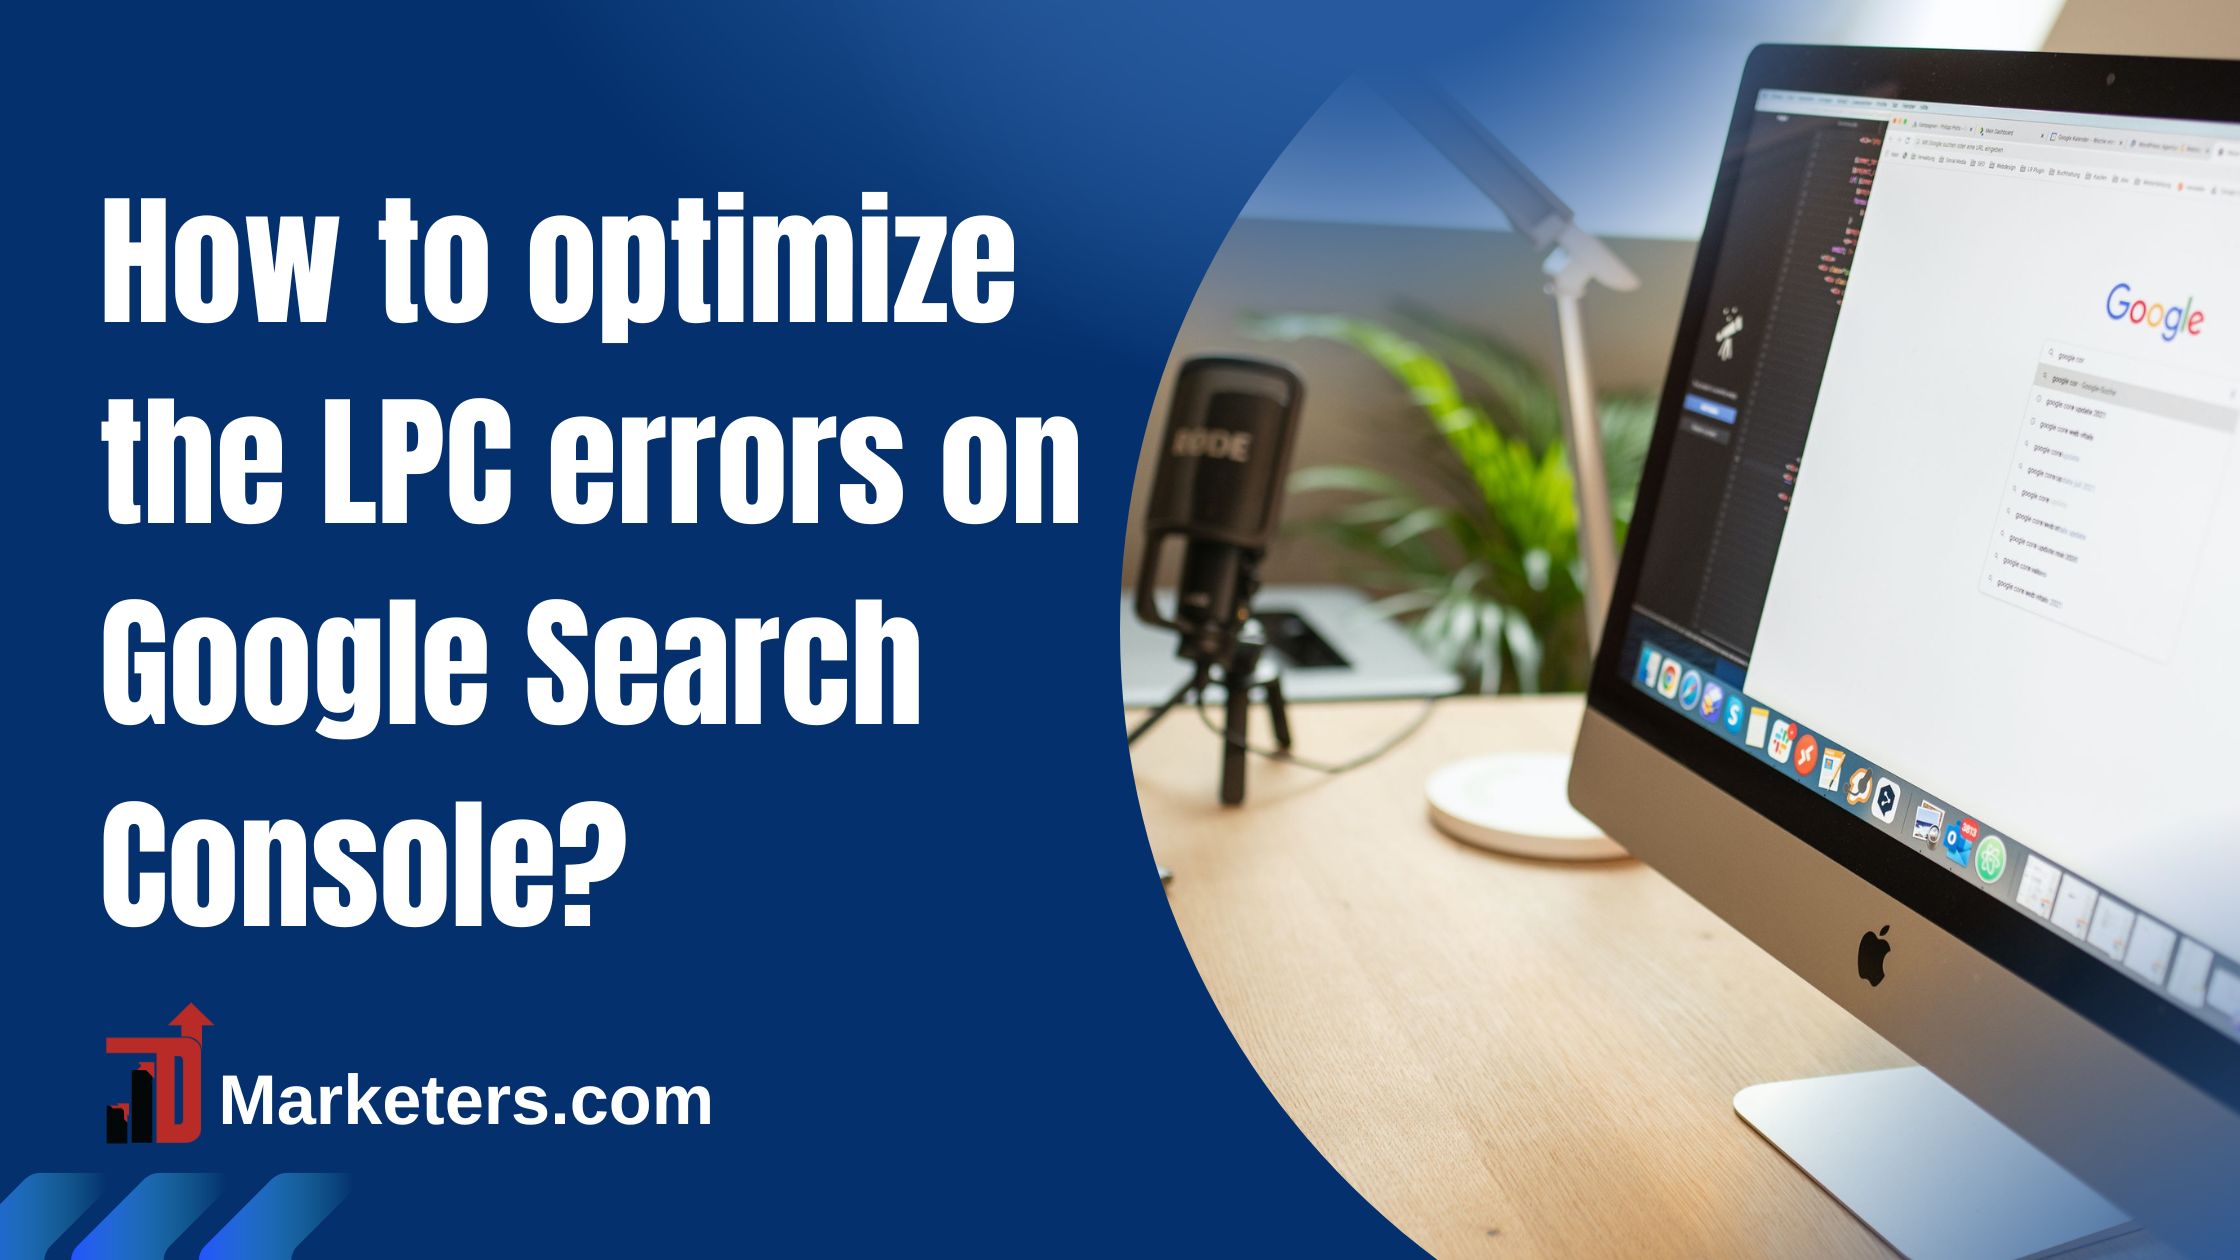 How to optimize the LPC errors on Google Search Console? 